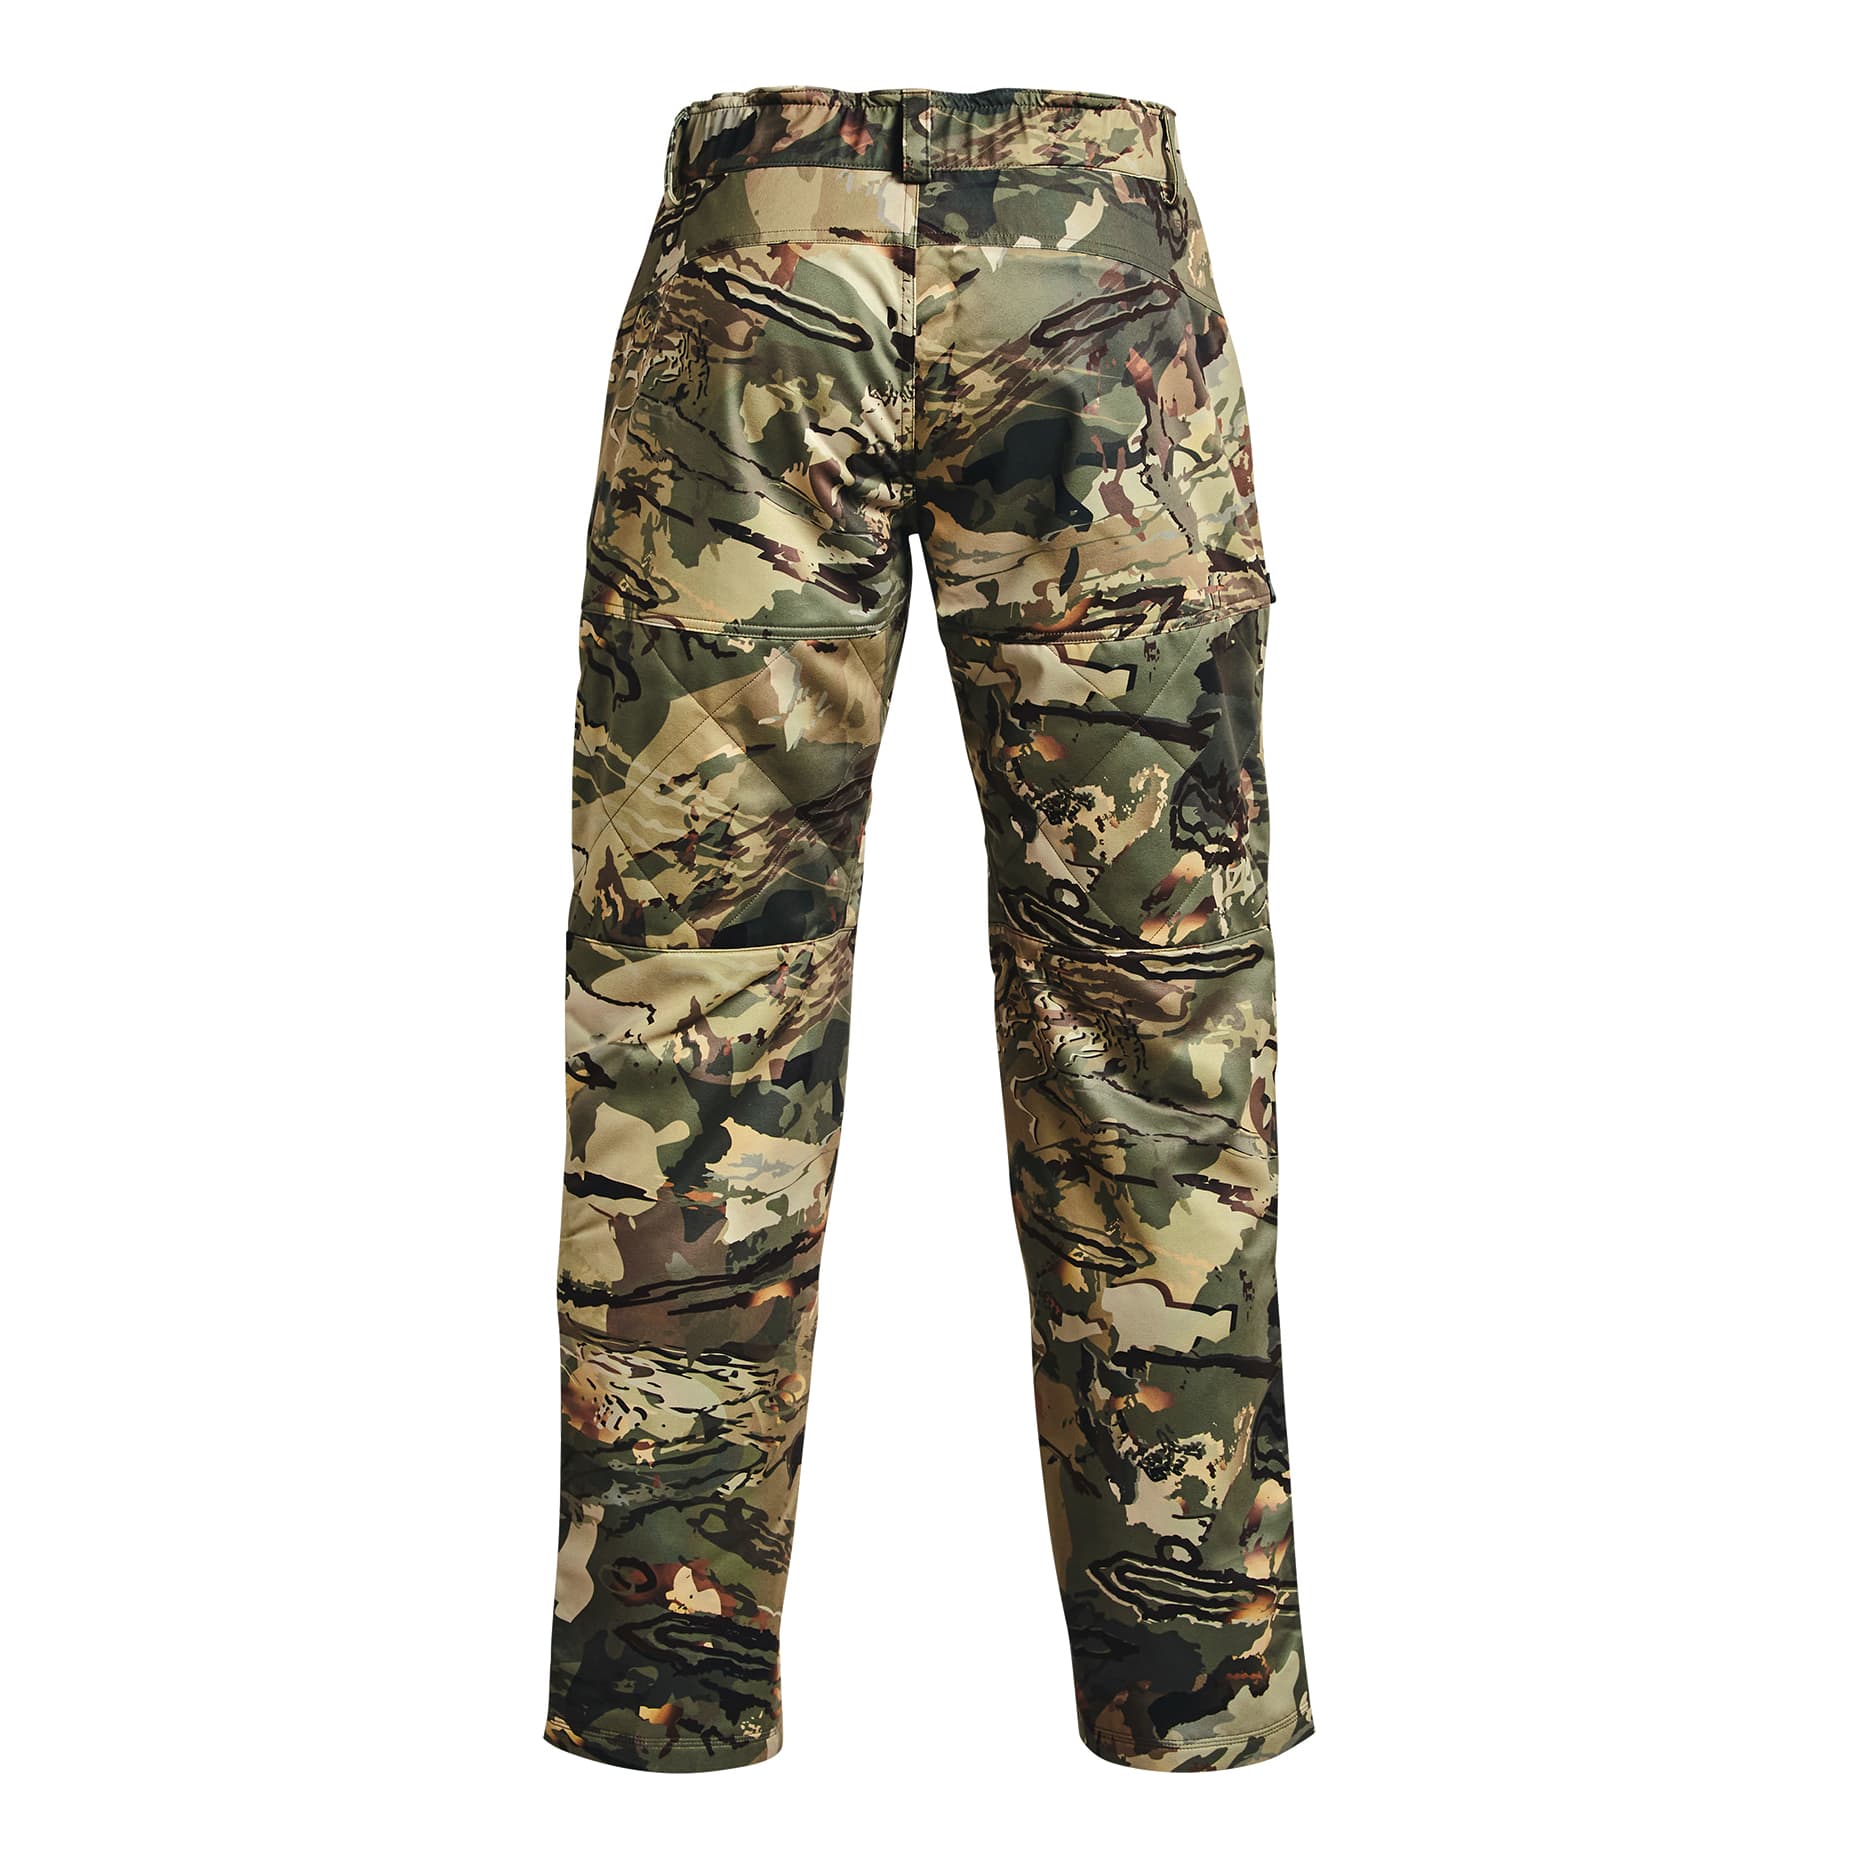 Under Armour® Men’s Brow Tine ColdGear® Infrared Pants - Forest Camo/Black - back